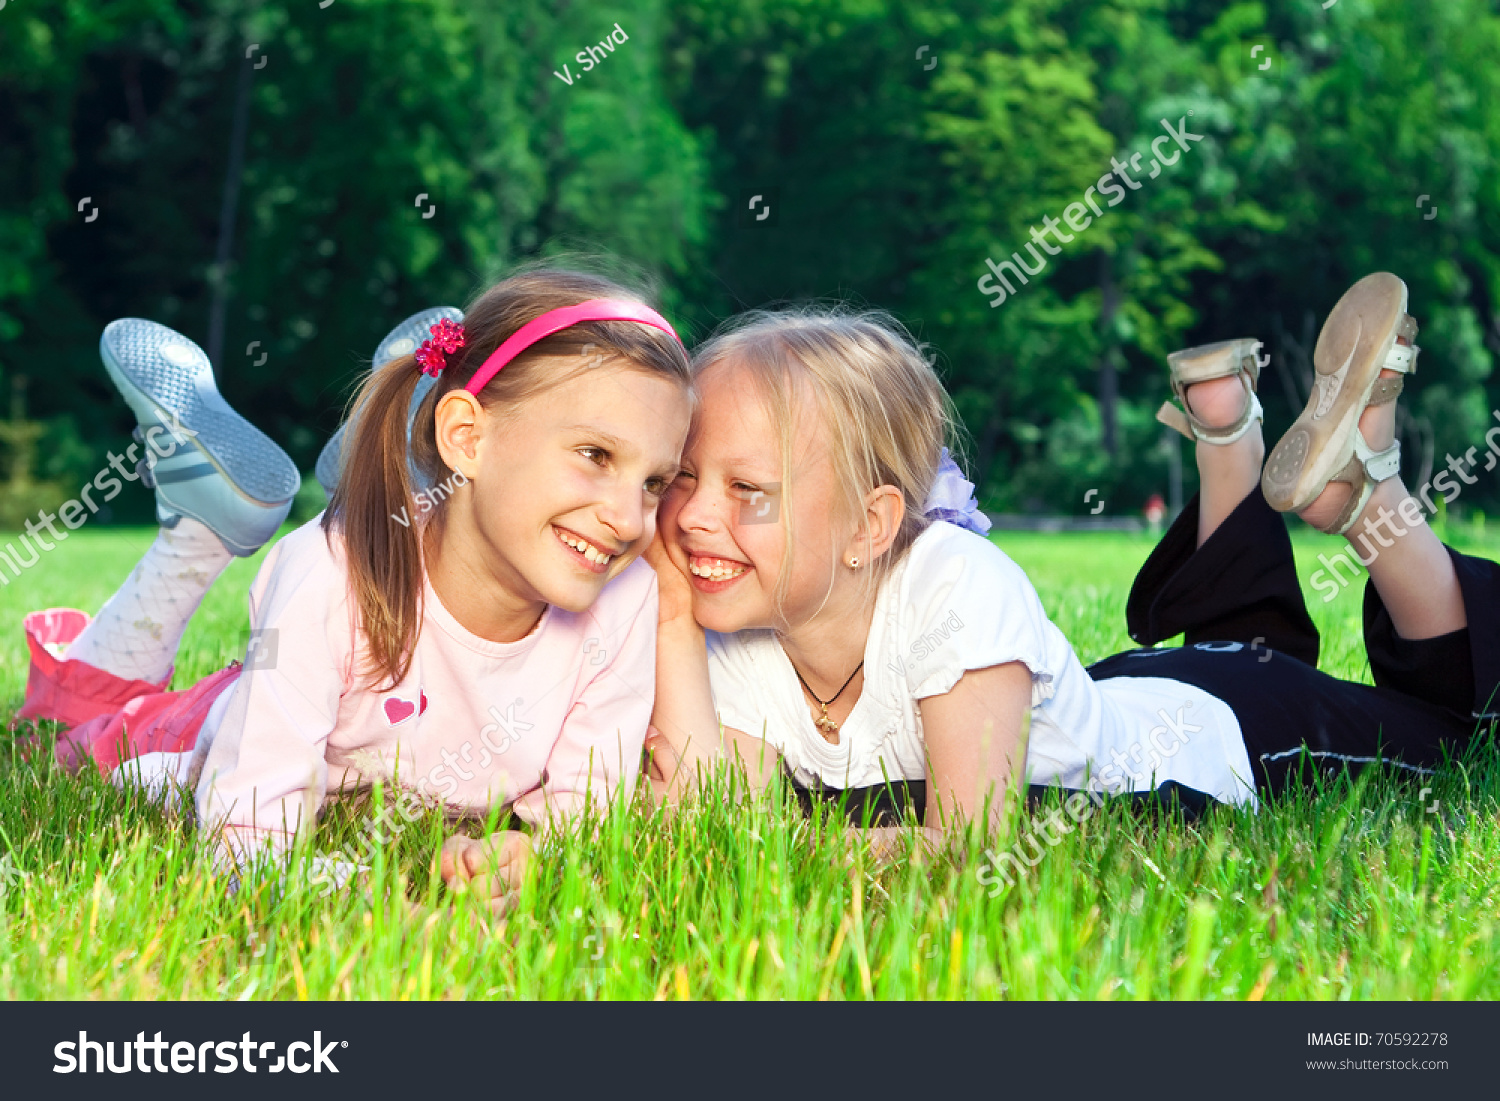 Two Cute Girls Laughing On The Green Grass Stock Photo 70592278 ...